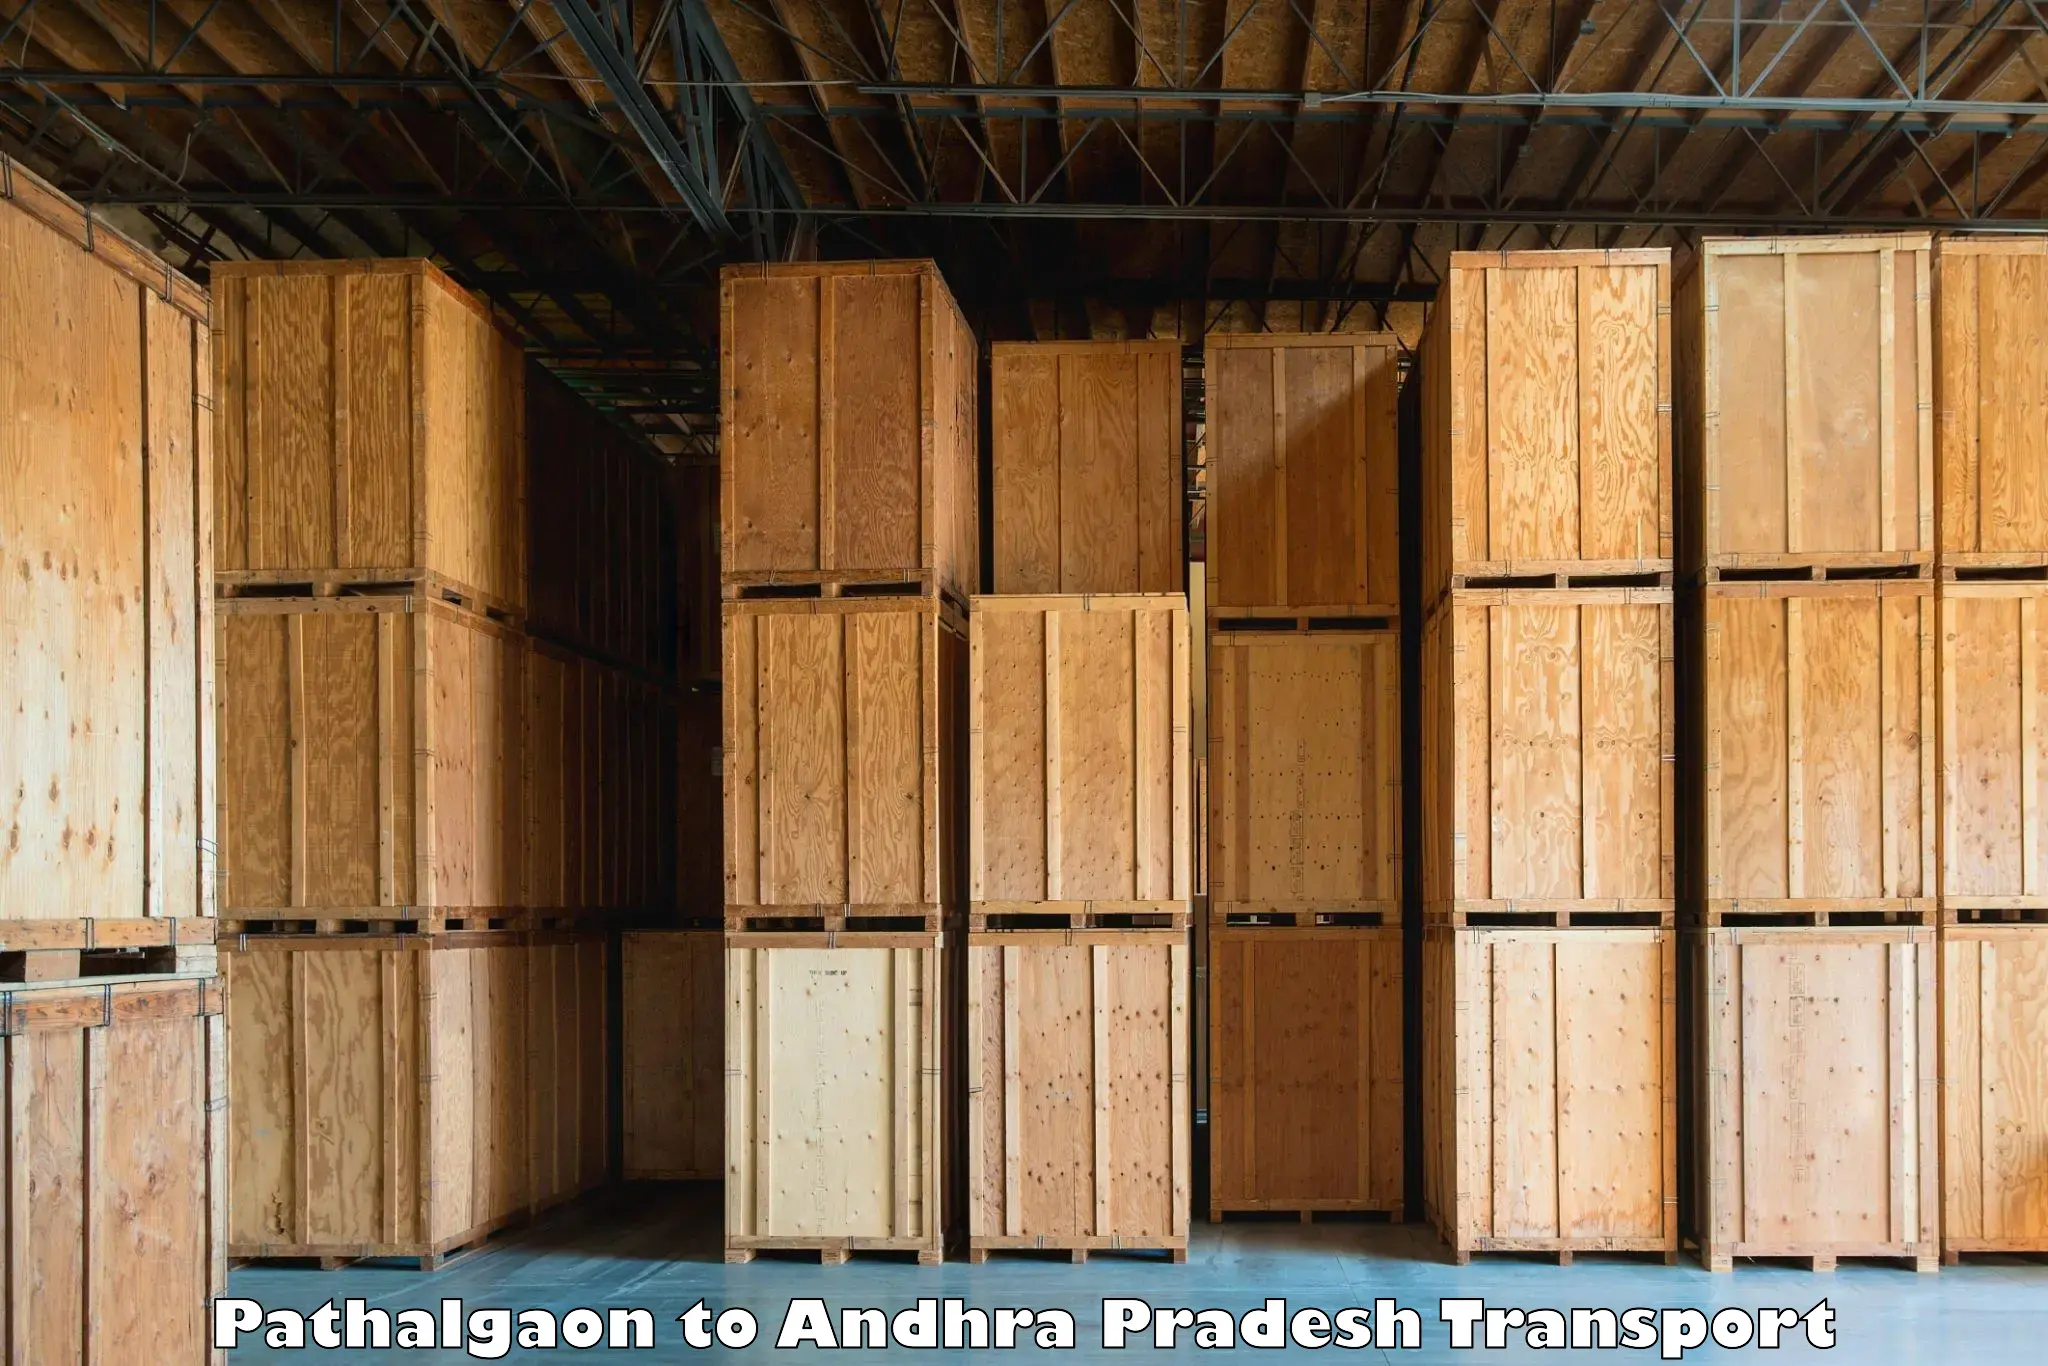 Transport shared services in Pathalgaon to Visakhapatnam Port